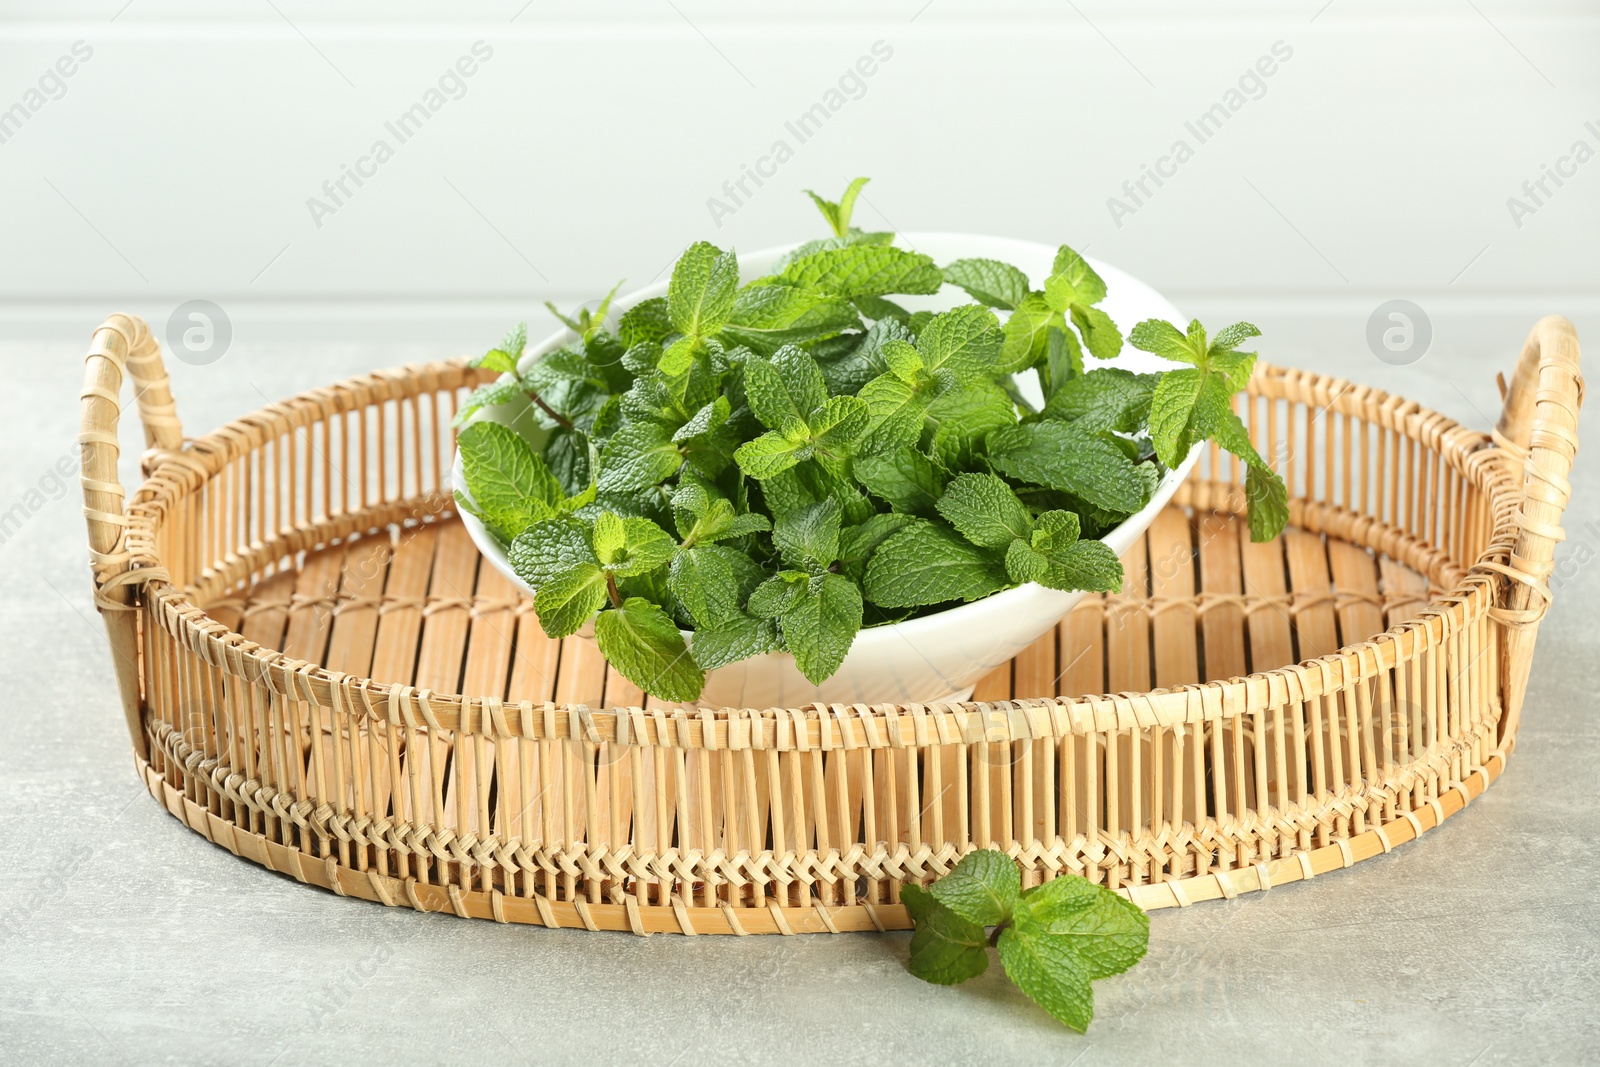 Photo of Wicker tray with bowl of fresh green mint leaves on grey table